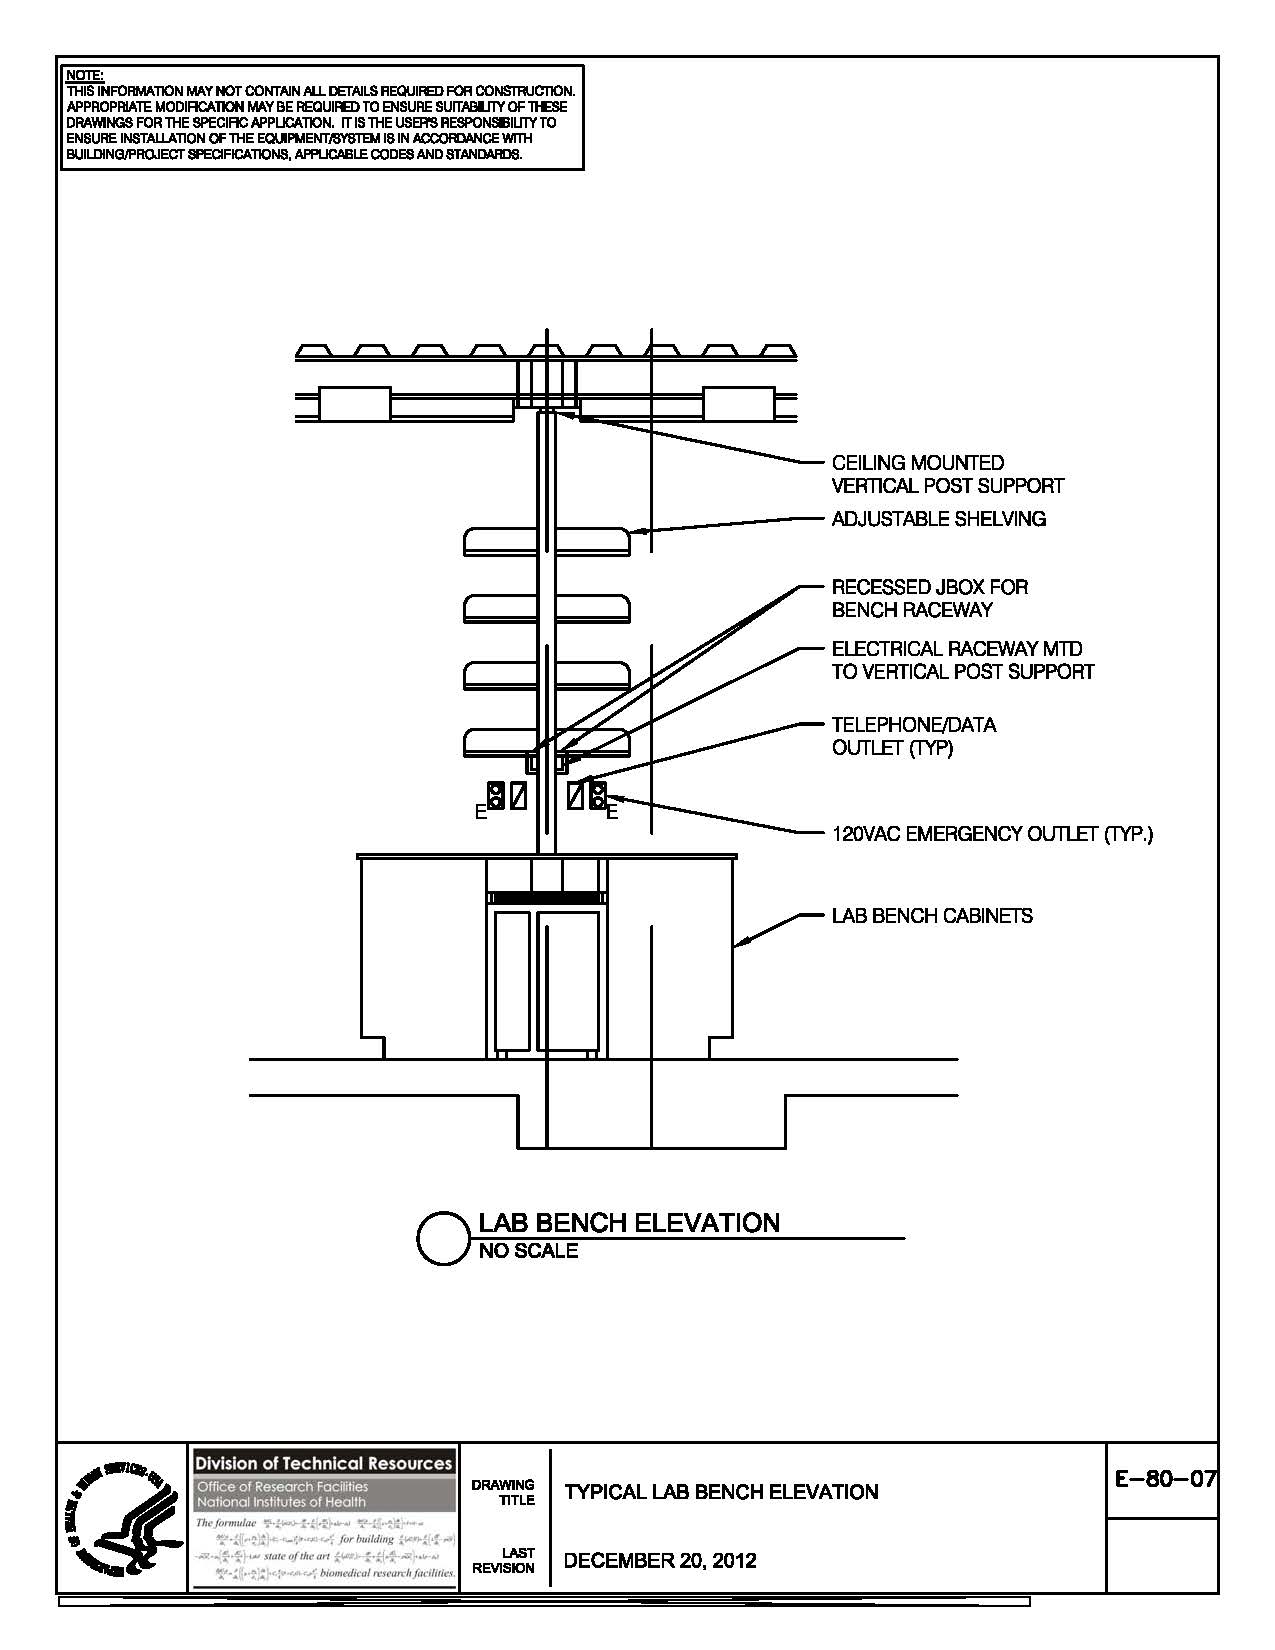 Dimmer Switch Wiring Diagram Autocad from www.orf.od.nih.gov